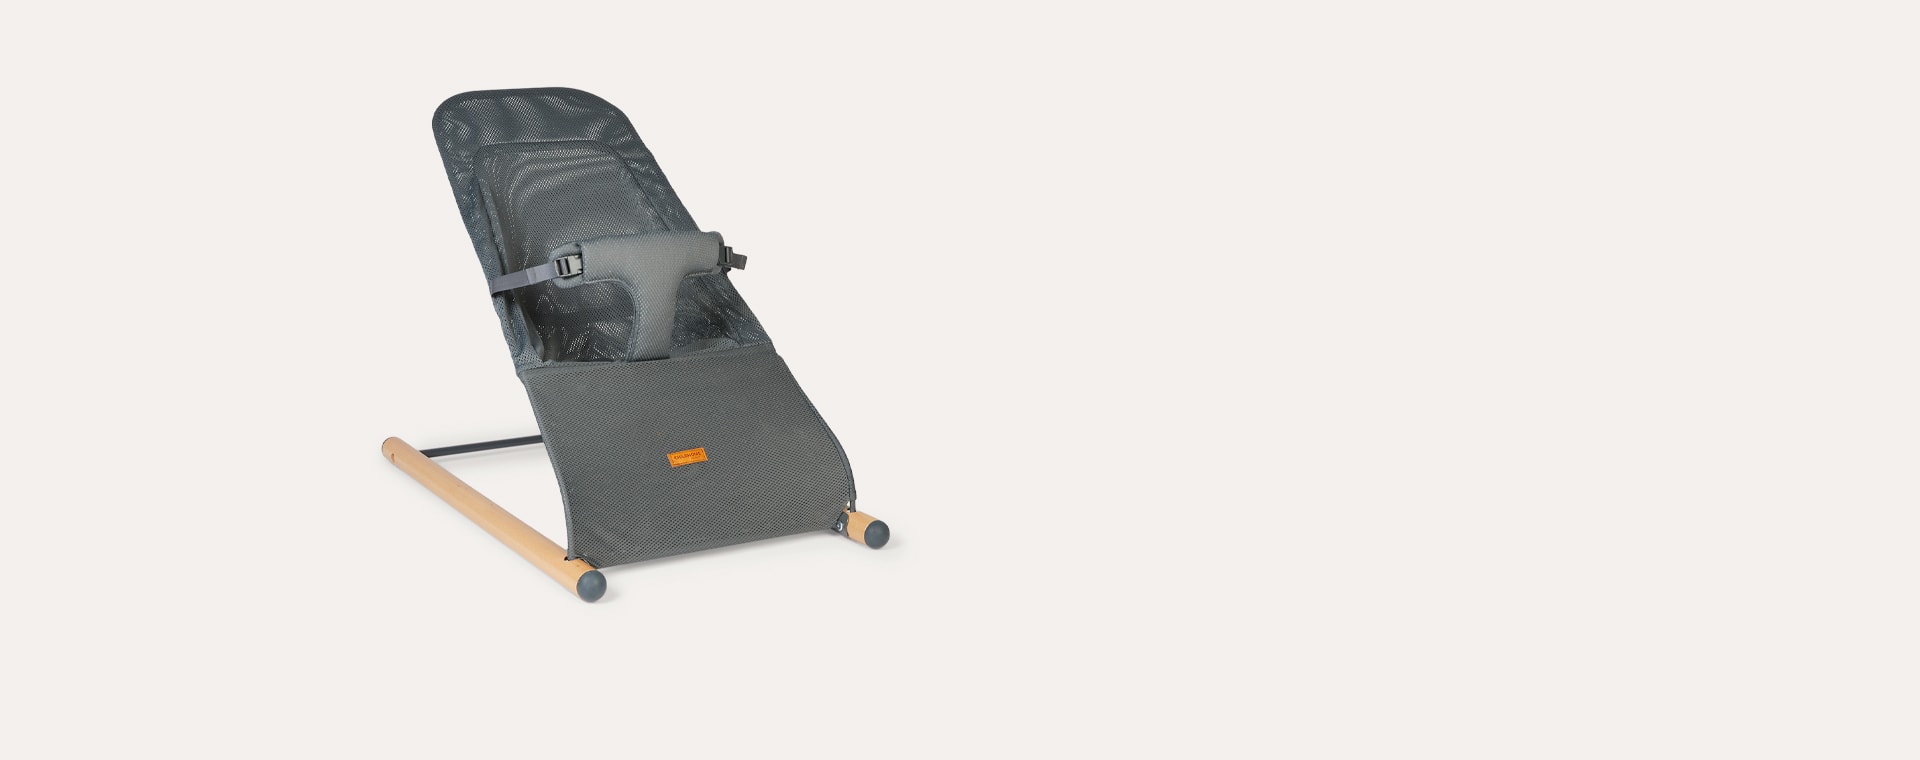 Anthracite Childhome Evolux Bouncer